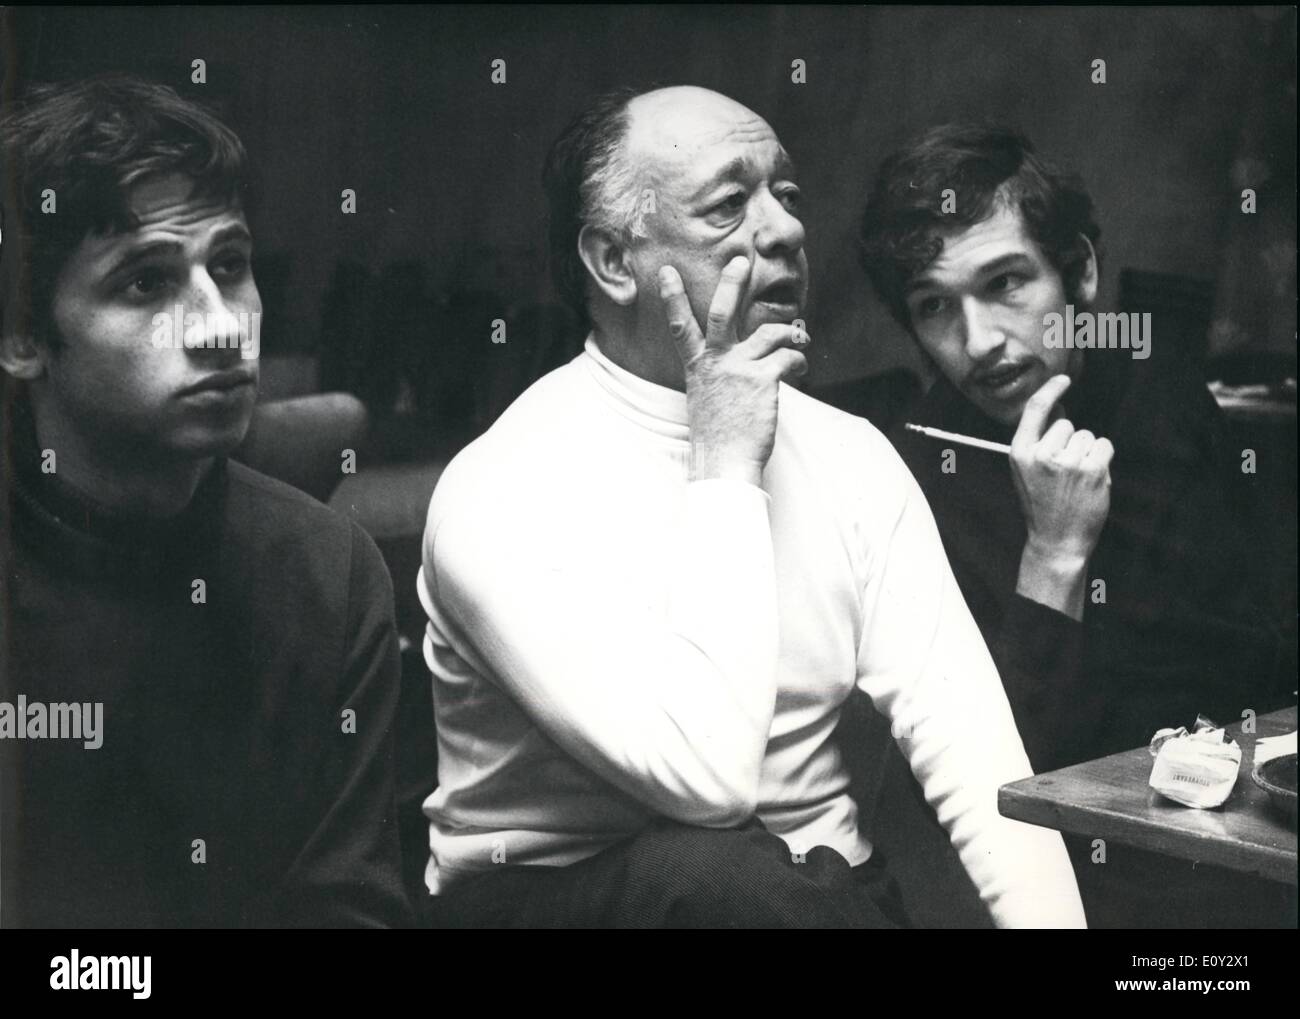 Sep. 09, 1968 - Ionesco puts on stage a play of Ionesco at Zurich: Rumanian born author Ionesco is actually in Zurich where he is putting on stage his absurd play ''Victim of duty'' to open this years thetre season Stock Photo